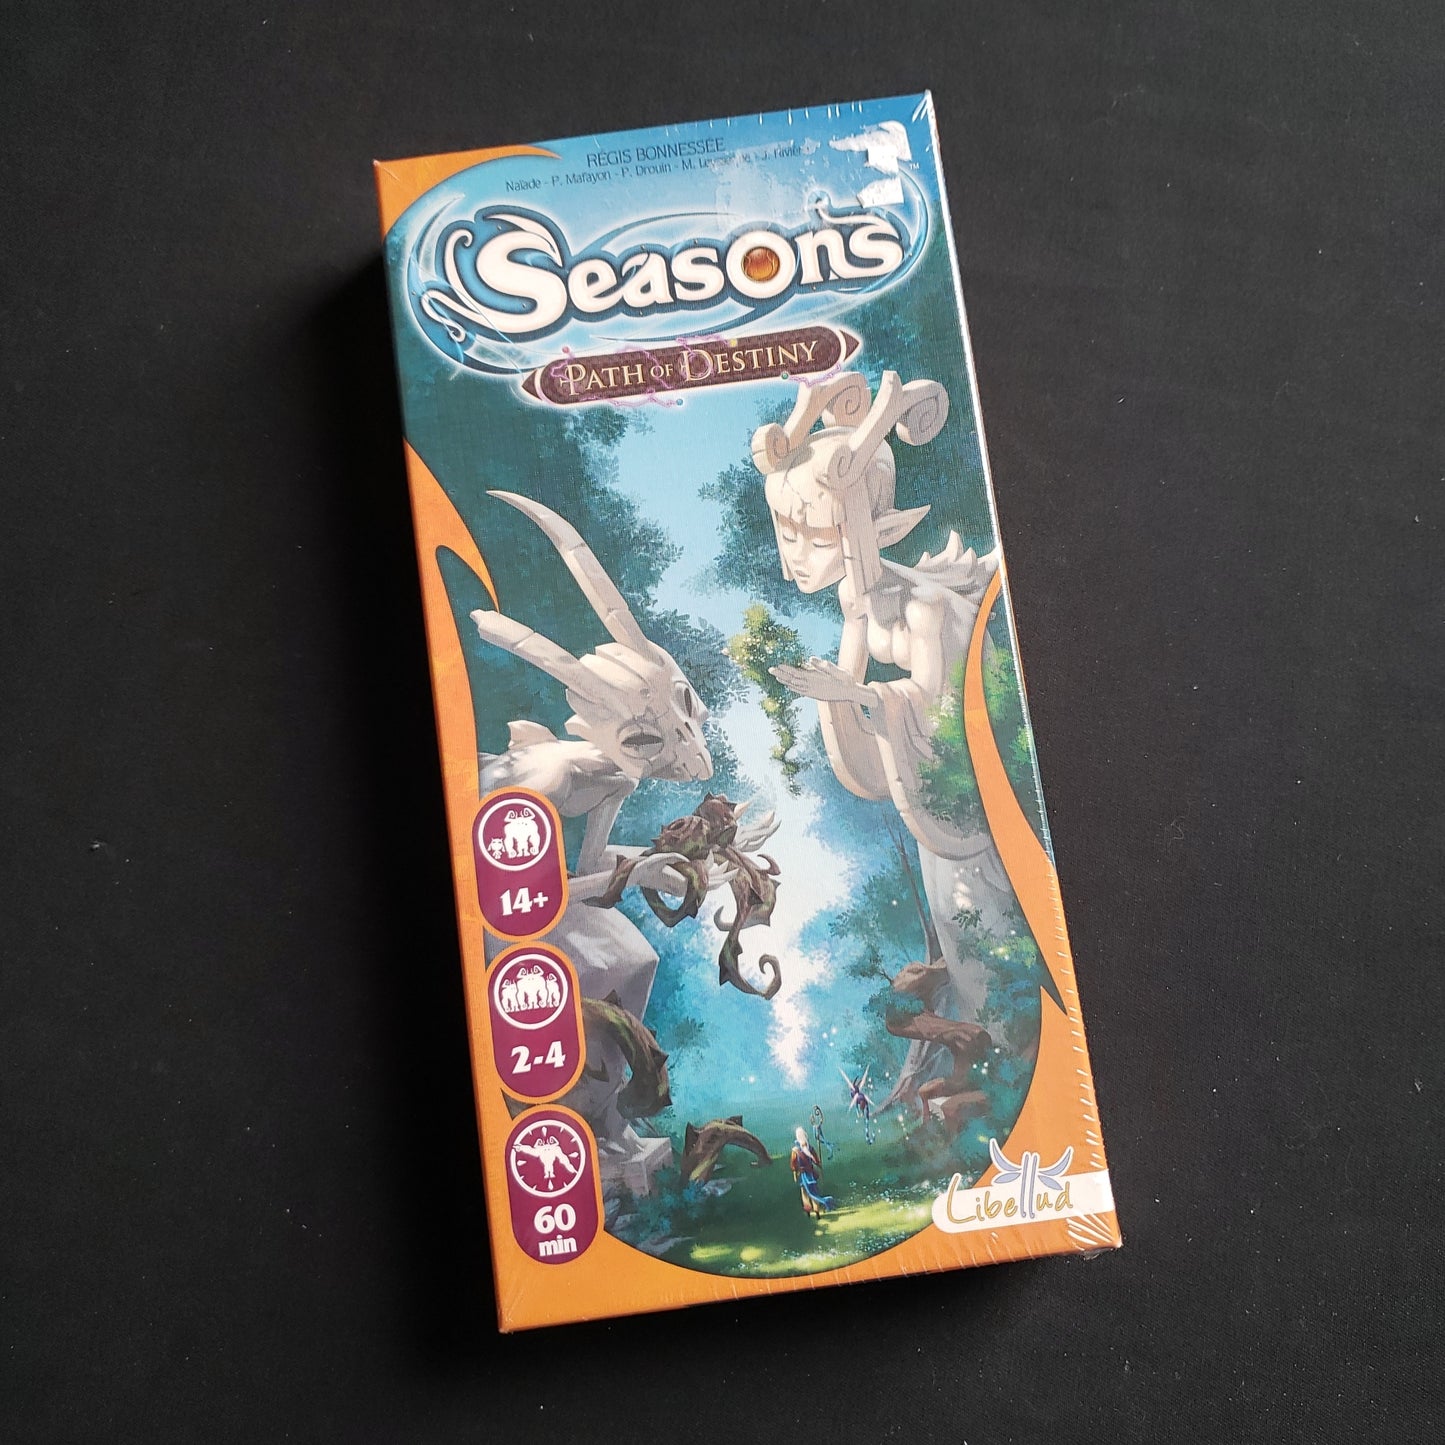 Image shows the front of the box for the Path of Destiny Expansion for the Seasons card game